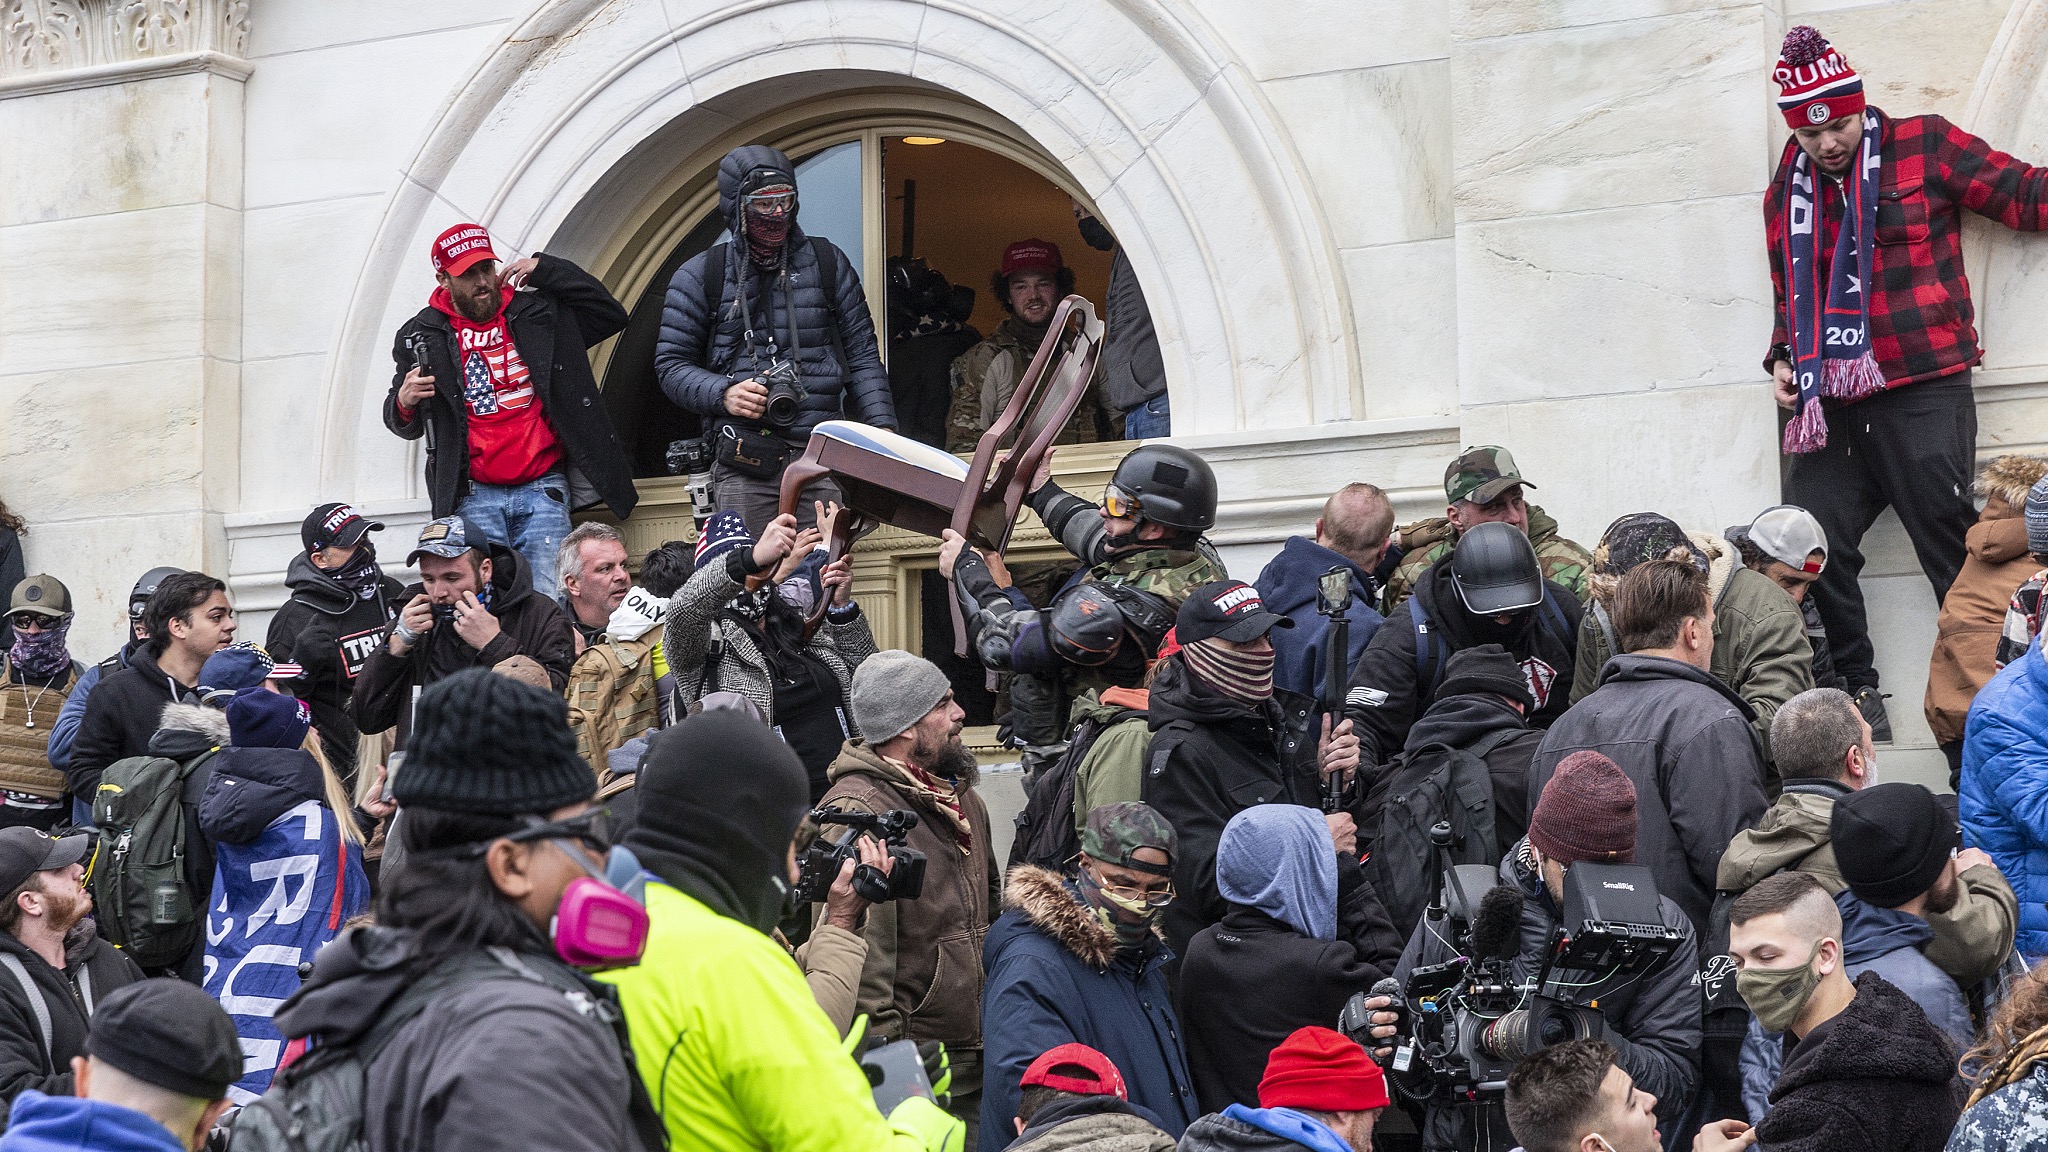 Some rioters breached through the windows into Capitol building and threw furniture out in Washington, D.C., U.S., January 6, 2021. /VCG